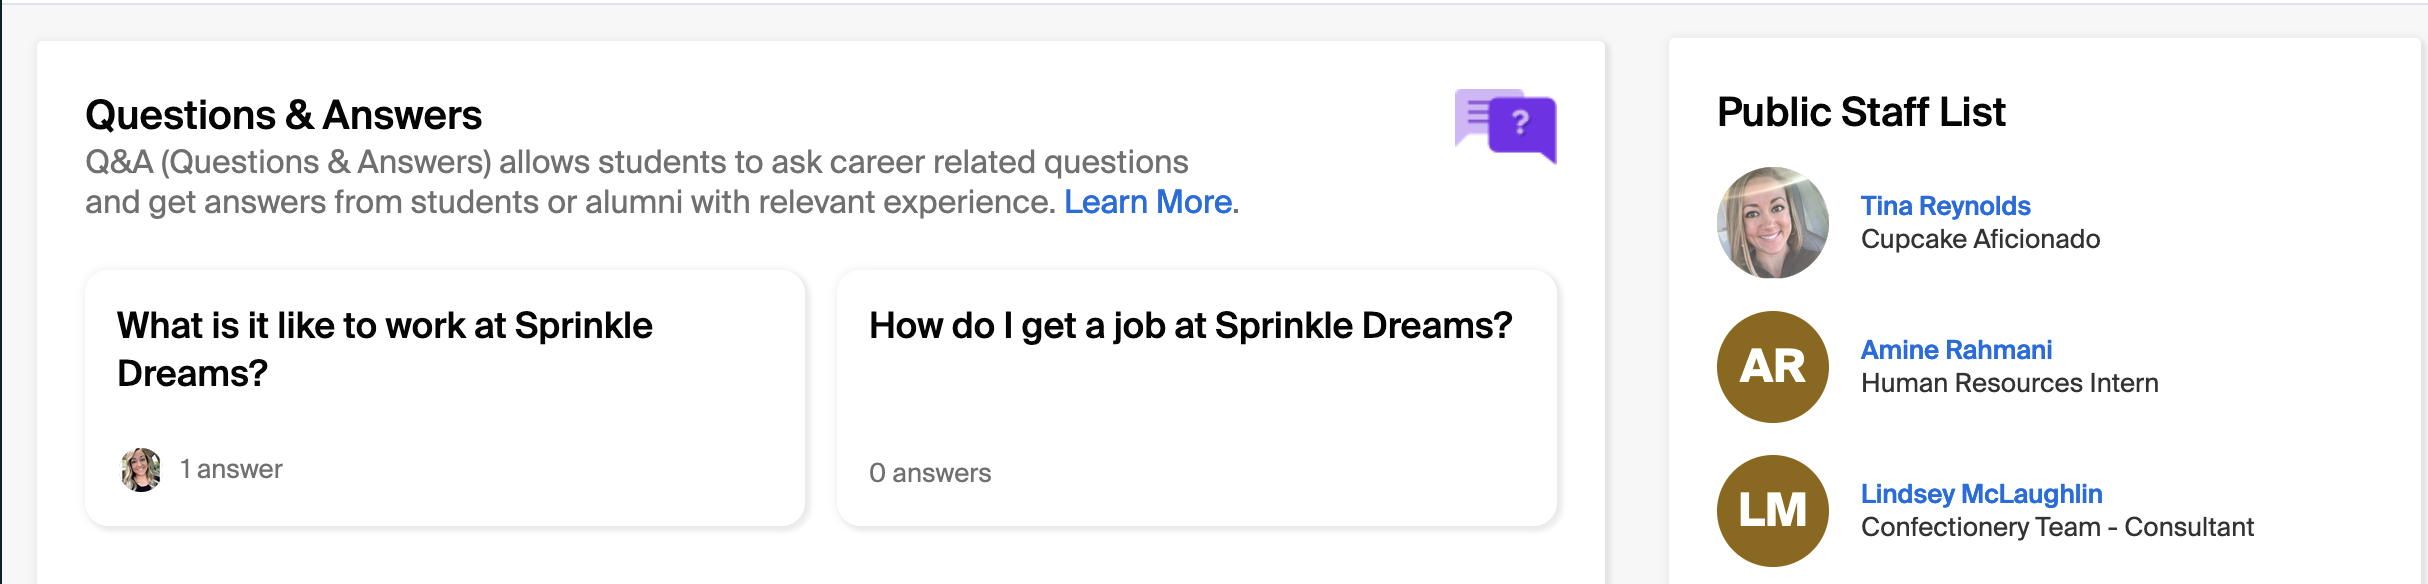 Question___Answers_on_the_Employer_Page.png